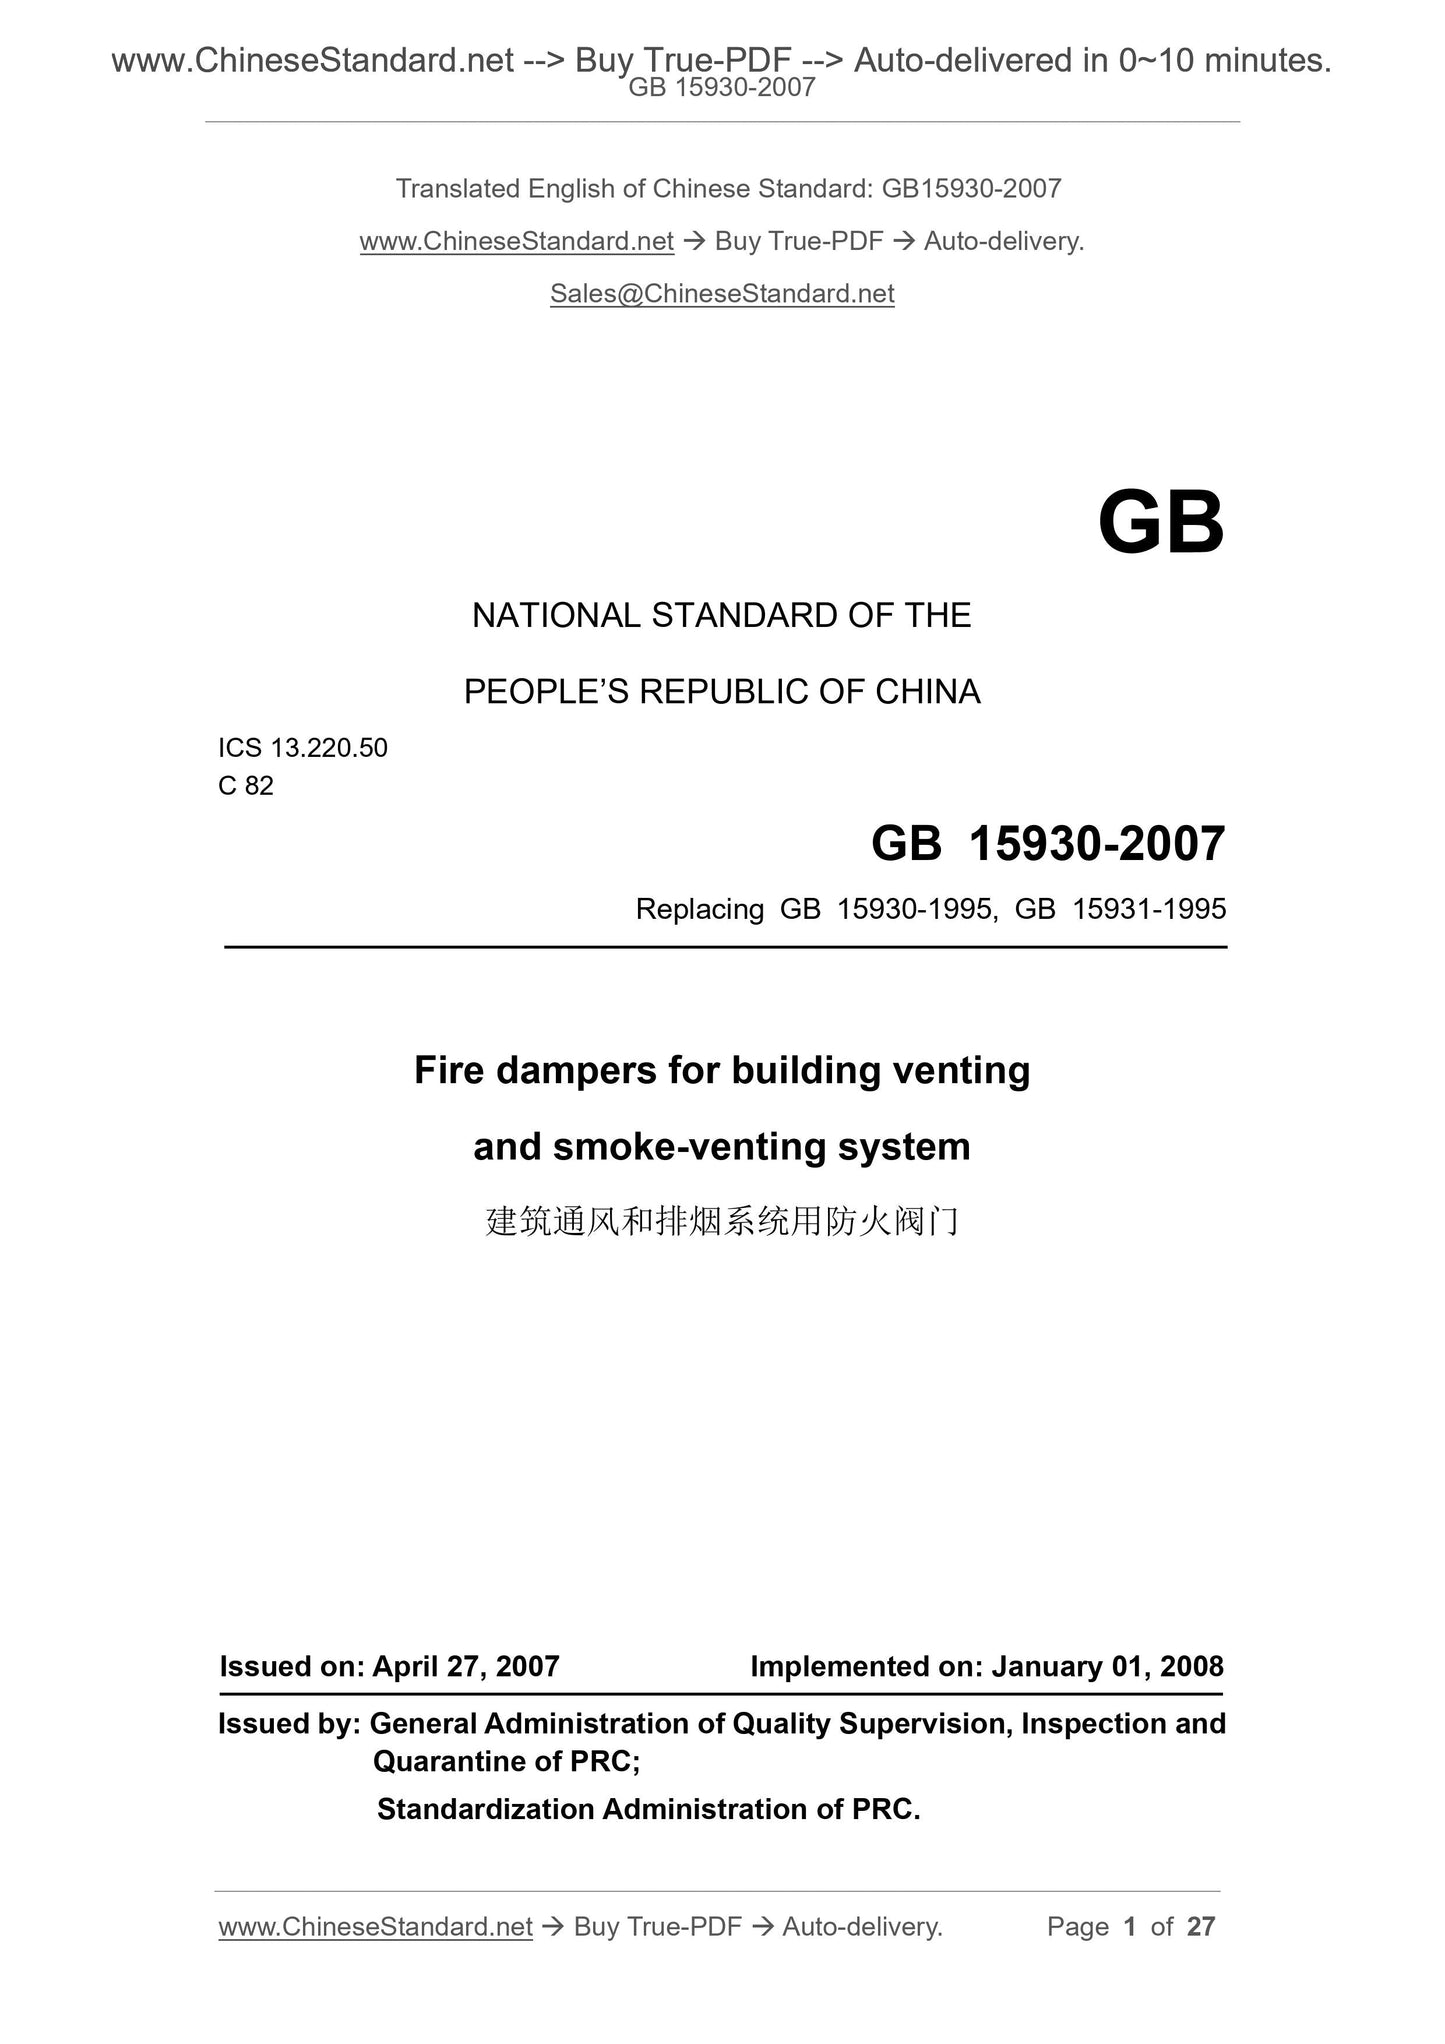 GB 15930-2007 Page 1